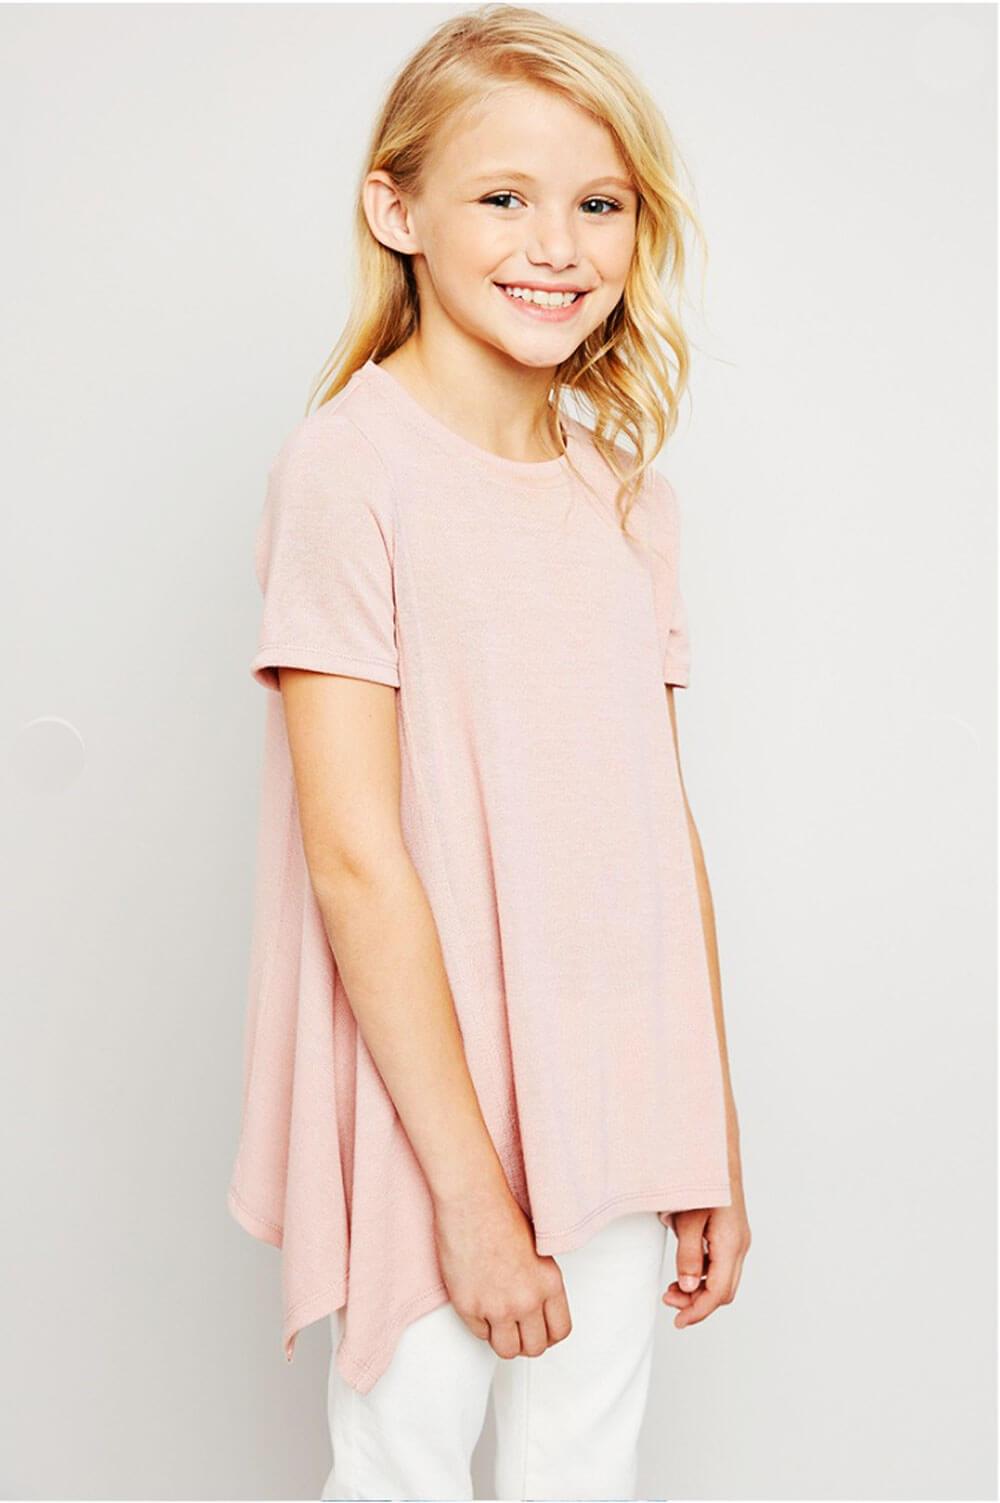 Lucy Long Tunic Top pink front MILK MONEY Kids